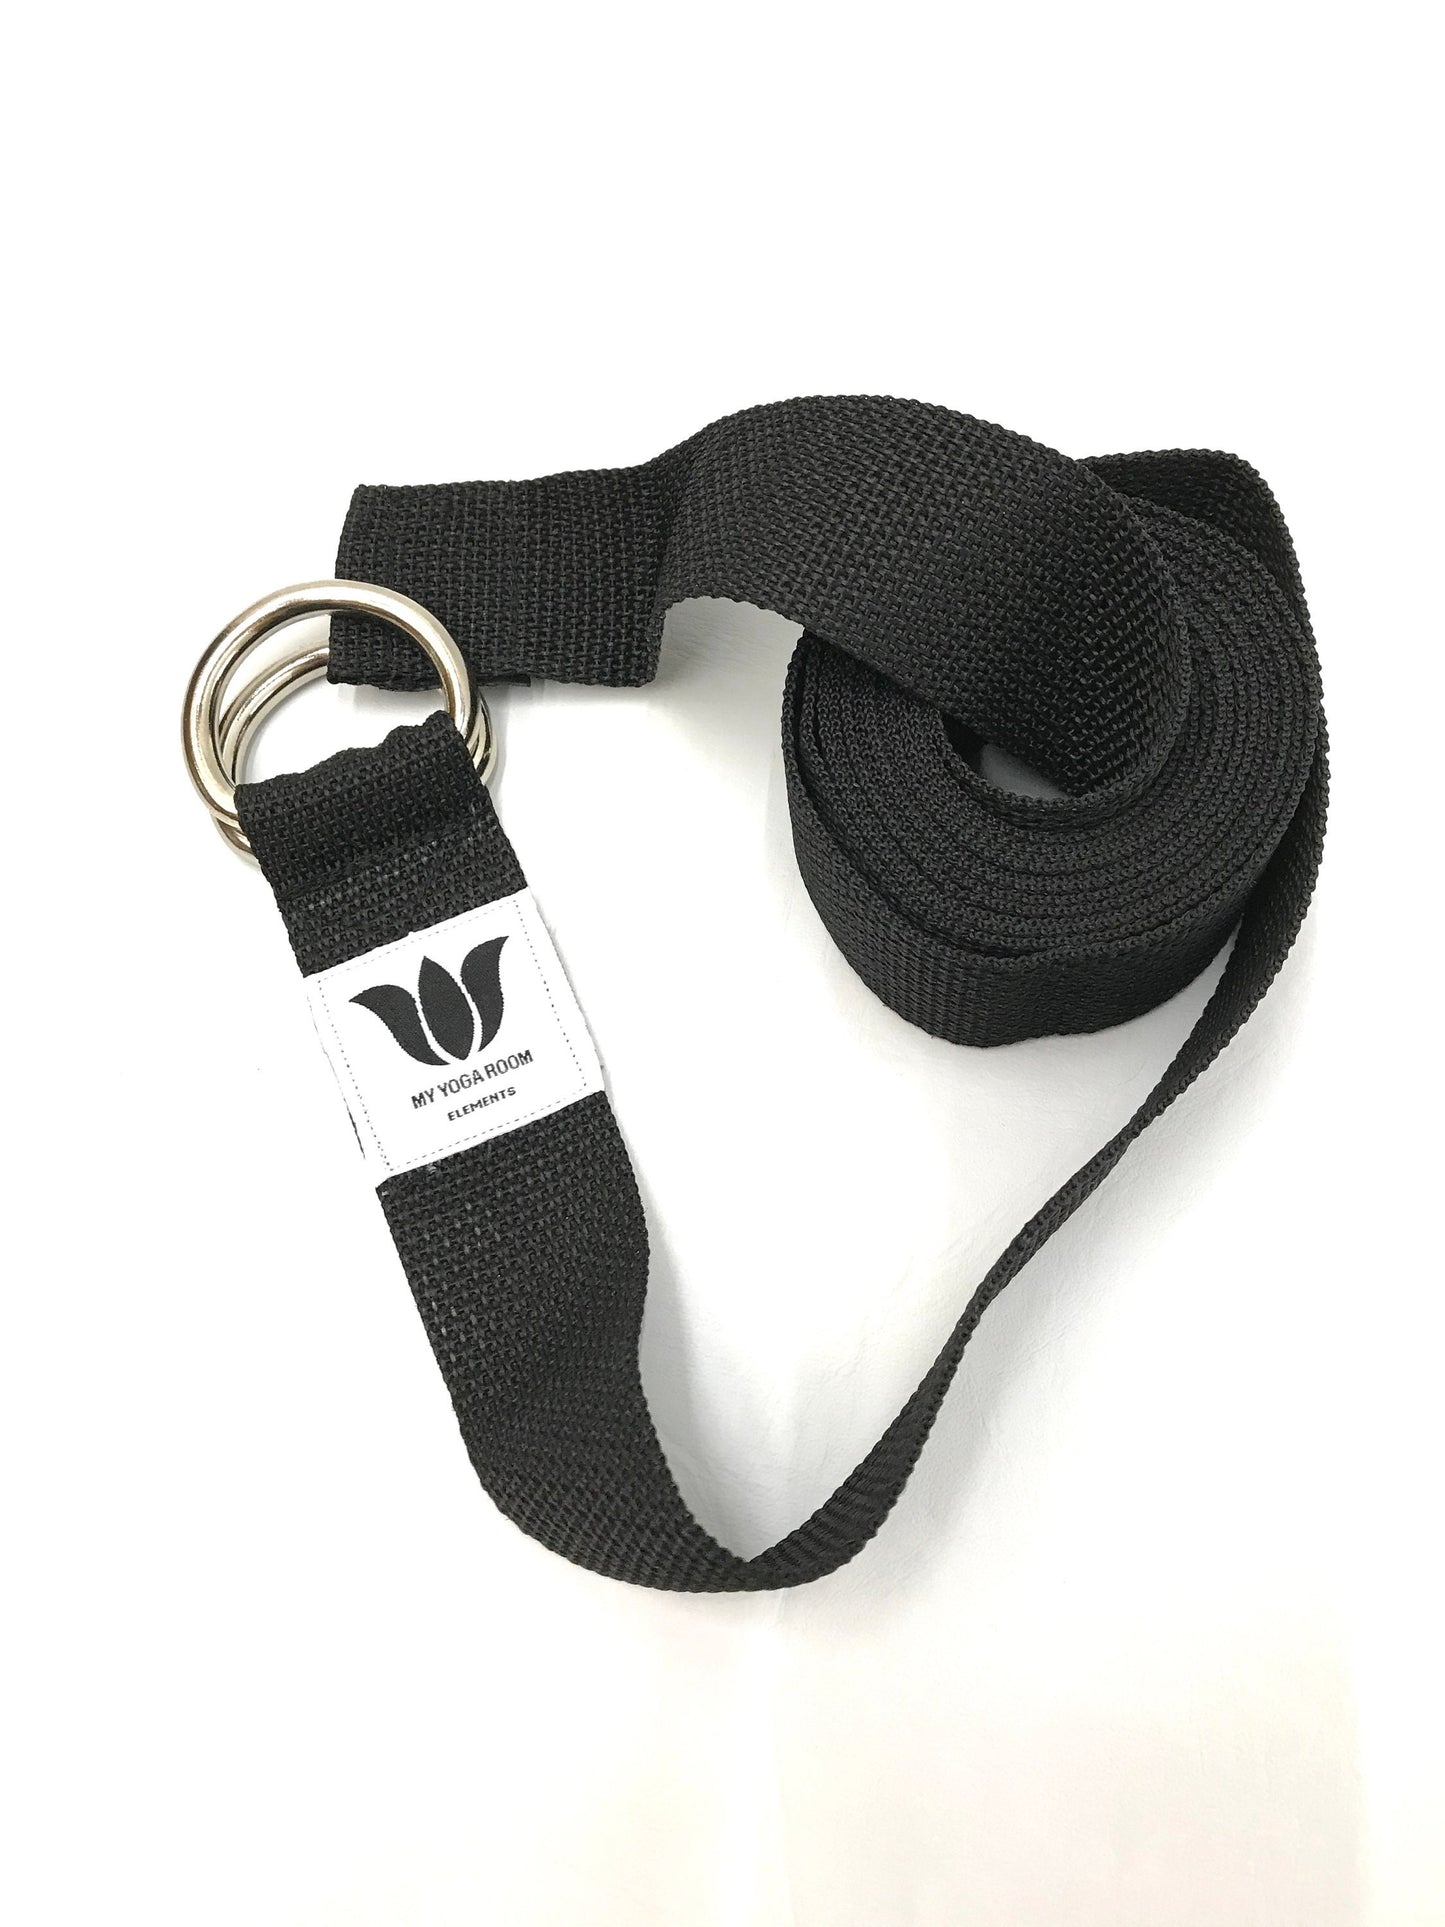 A sturdy black web yoga strap for aligning, supporting or assisting the body in yoga poses. A handcrafted, Canadian Made, yoga prop from My Yoga Room Elements